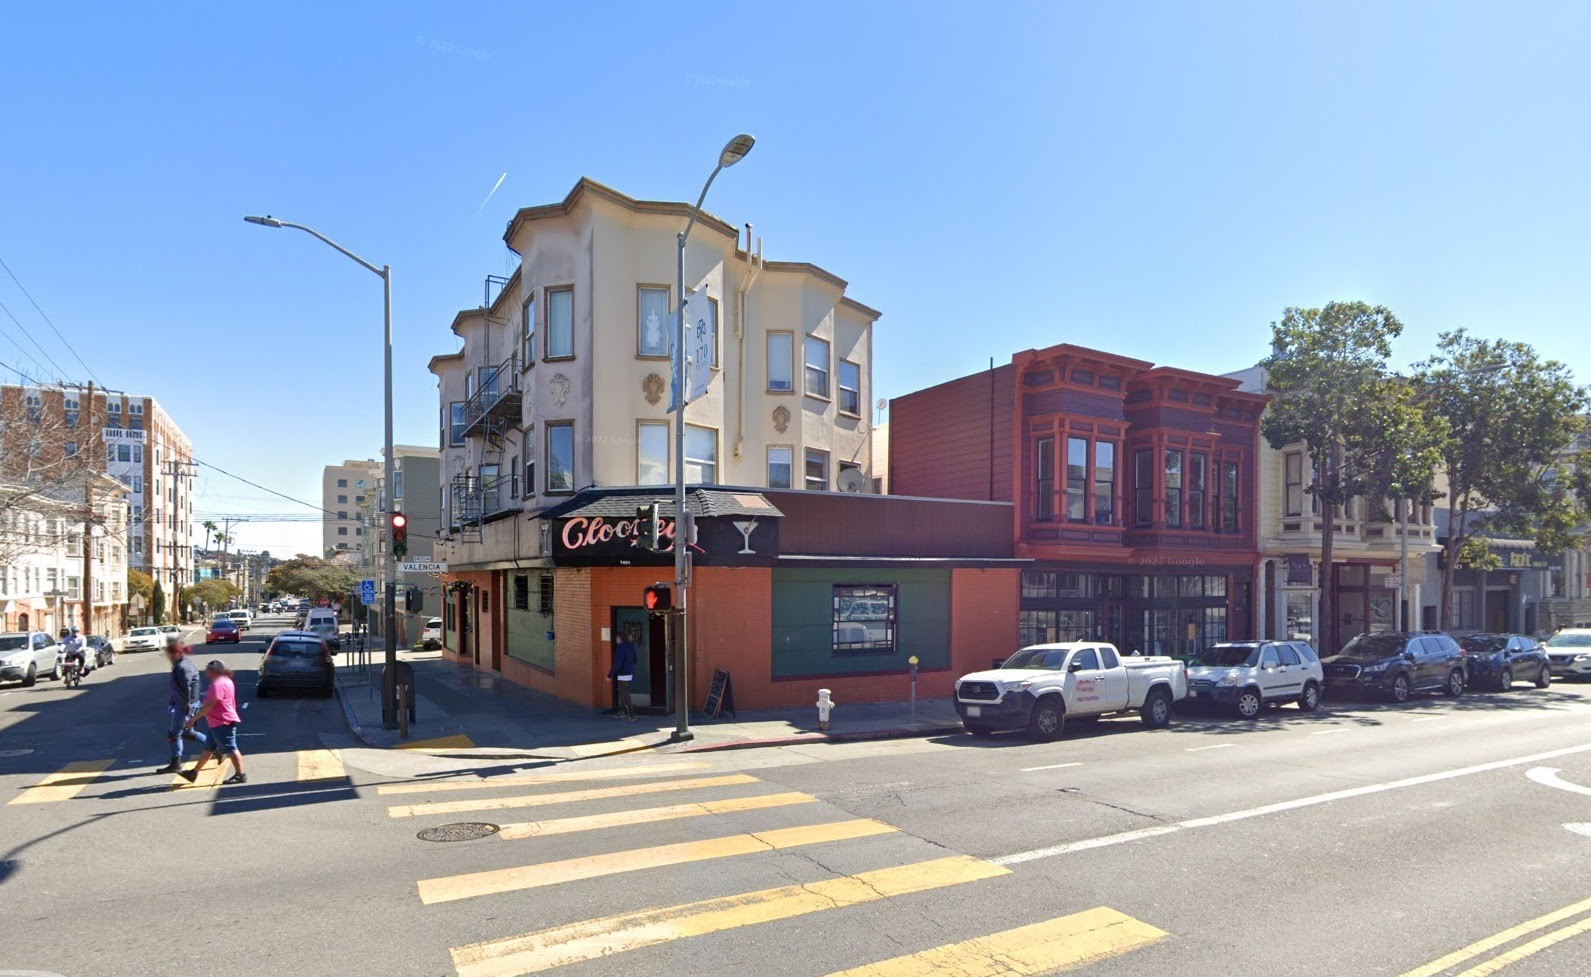 A Google Street View image from March 2022 shows Clooney's Bar at the corner of Valencia and 25th streets in San Francisco's Mission District.